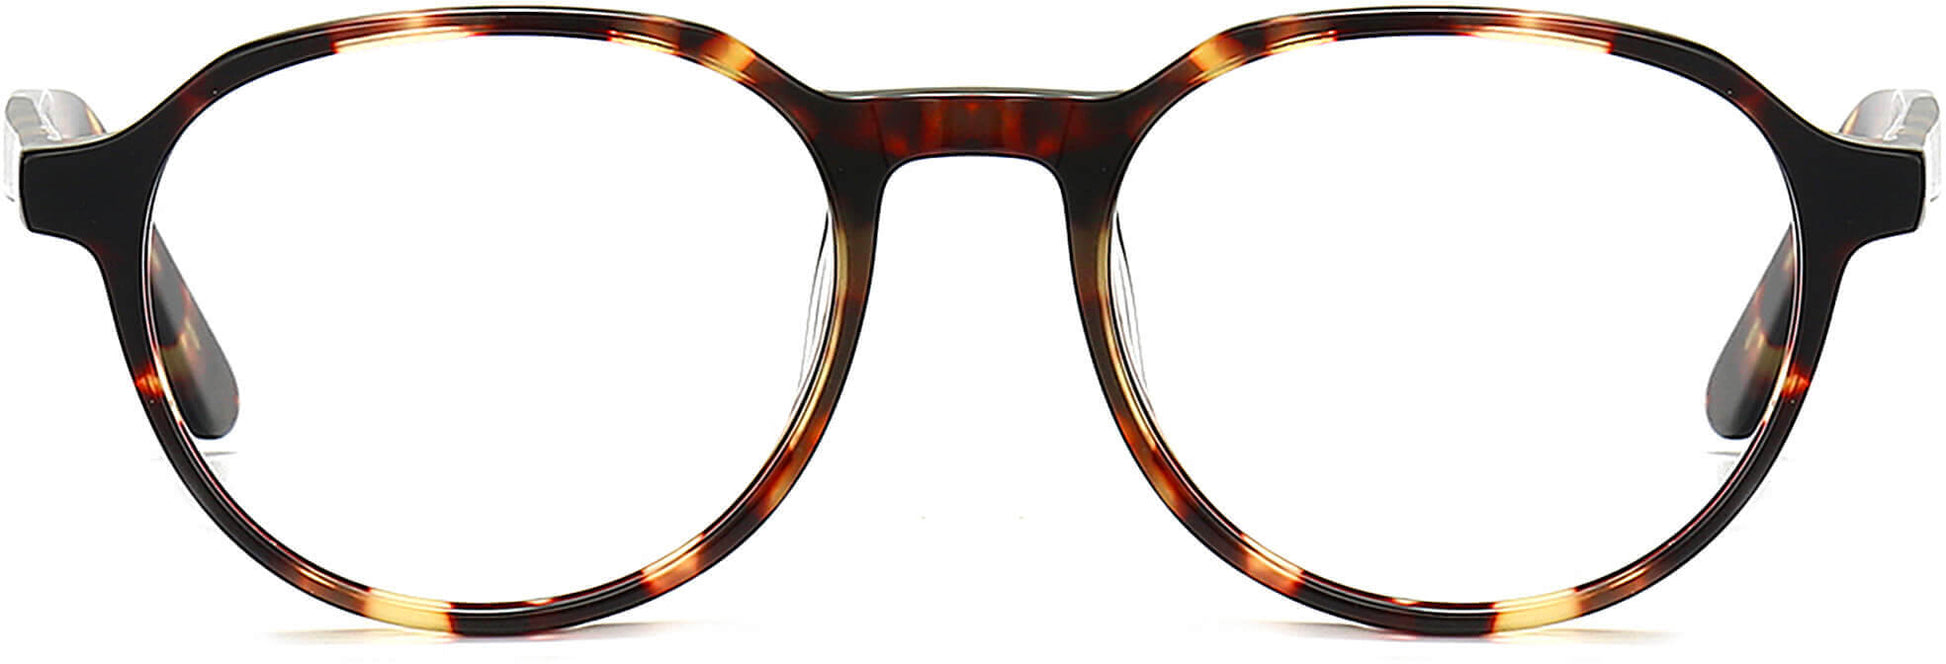 Stetson Round Tortoise Eyeglasses from ANRRI, front view